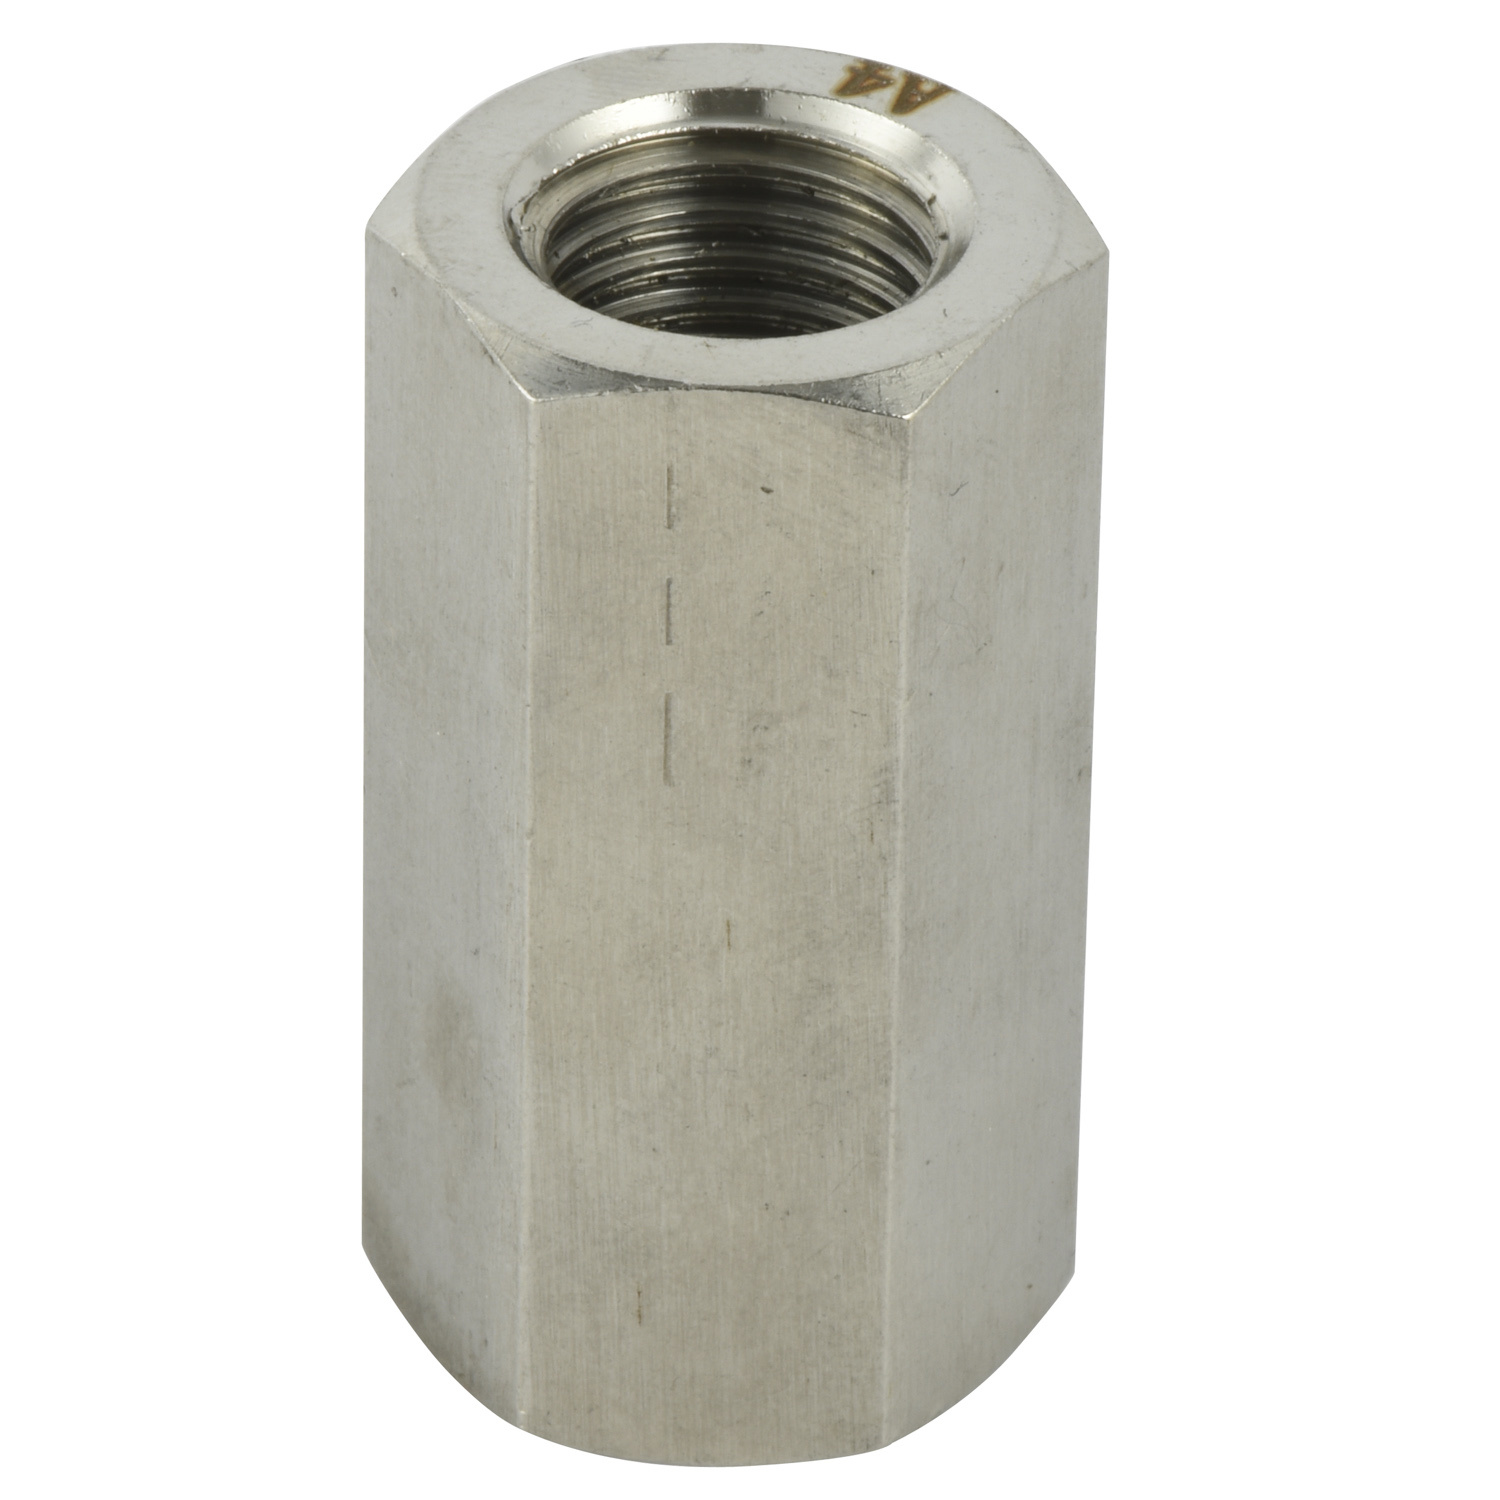 Hex Long Nut Coupler for Thread Rod Long Rod Nut Hex Coupling Nut Female Thread Straight Fitting 